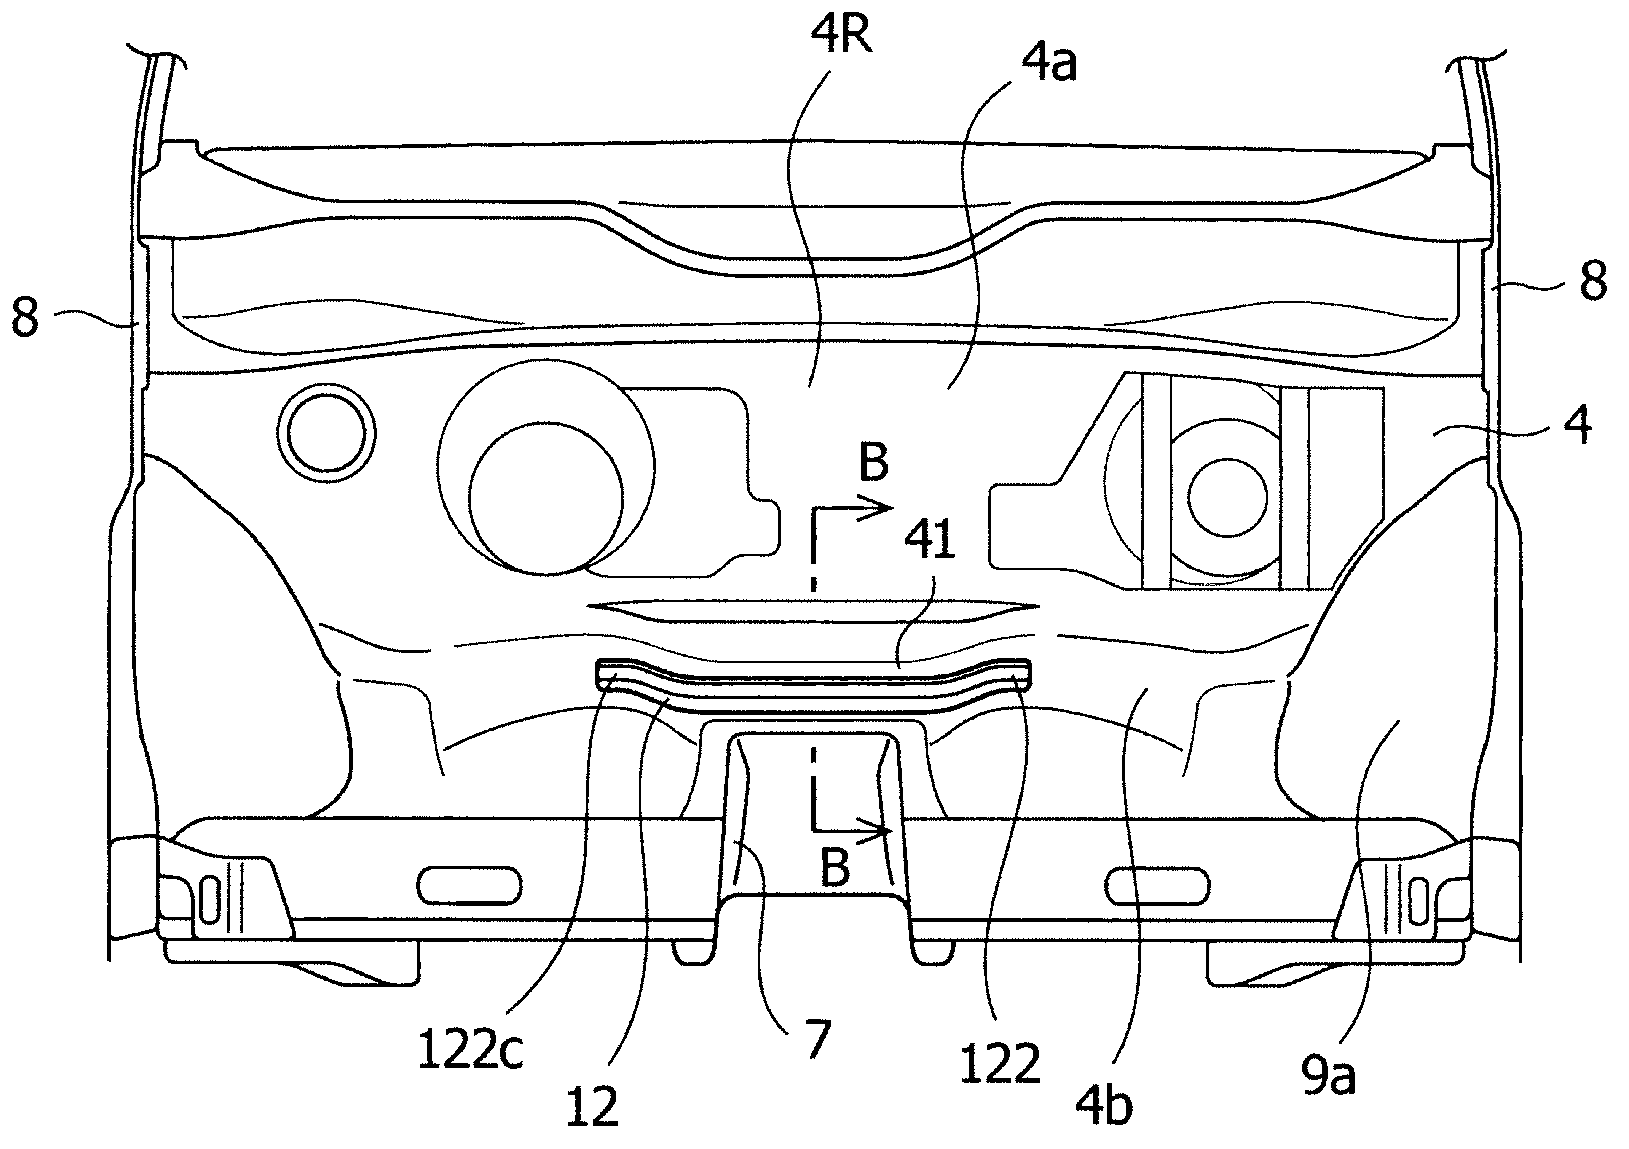 Mounting structure for dash cross beam at front part of vehicle